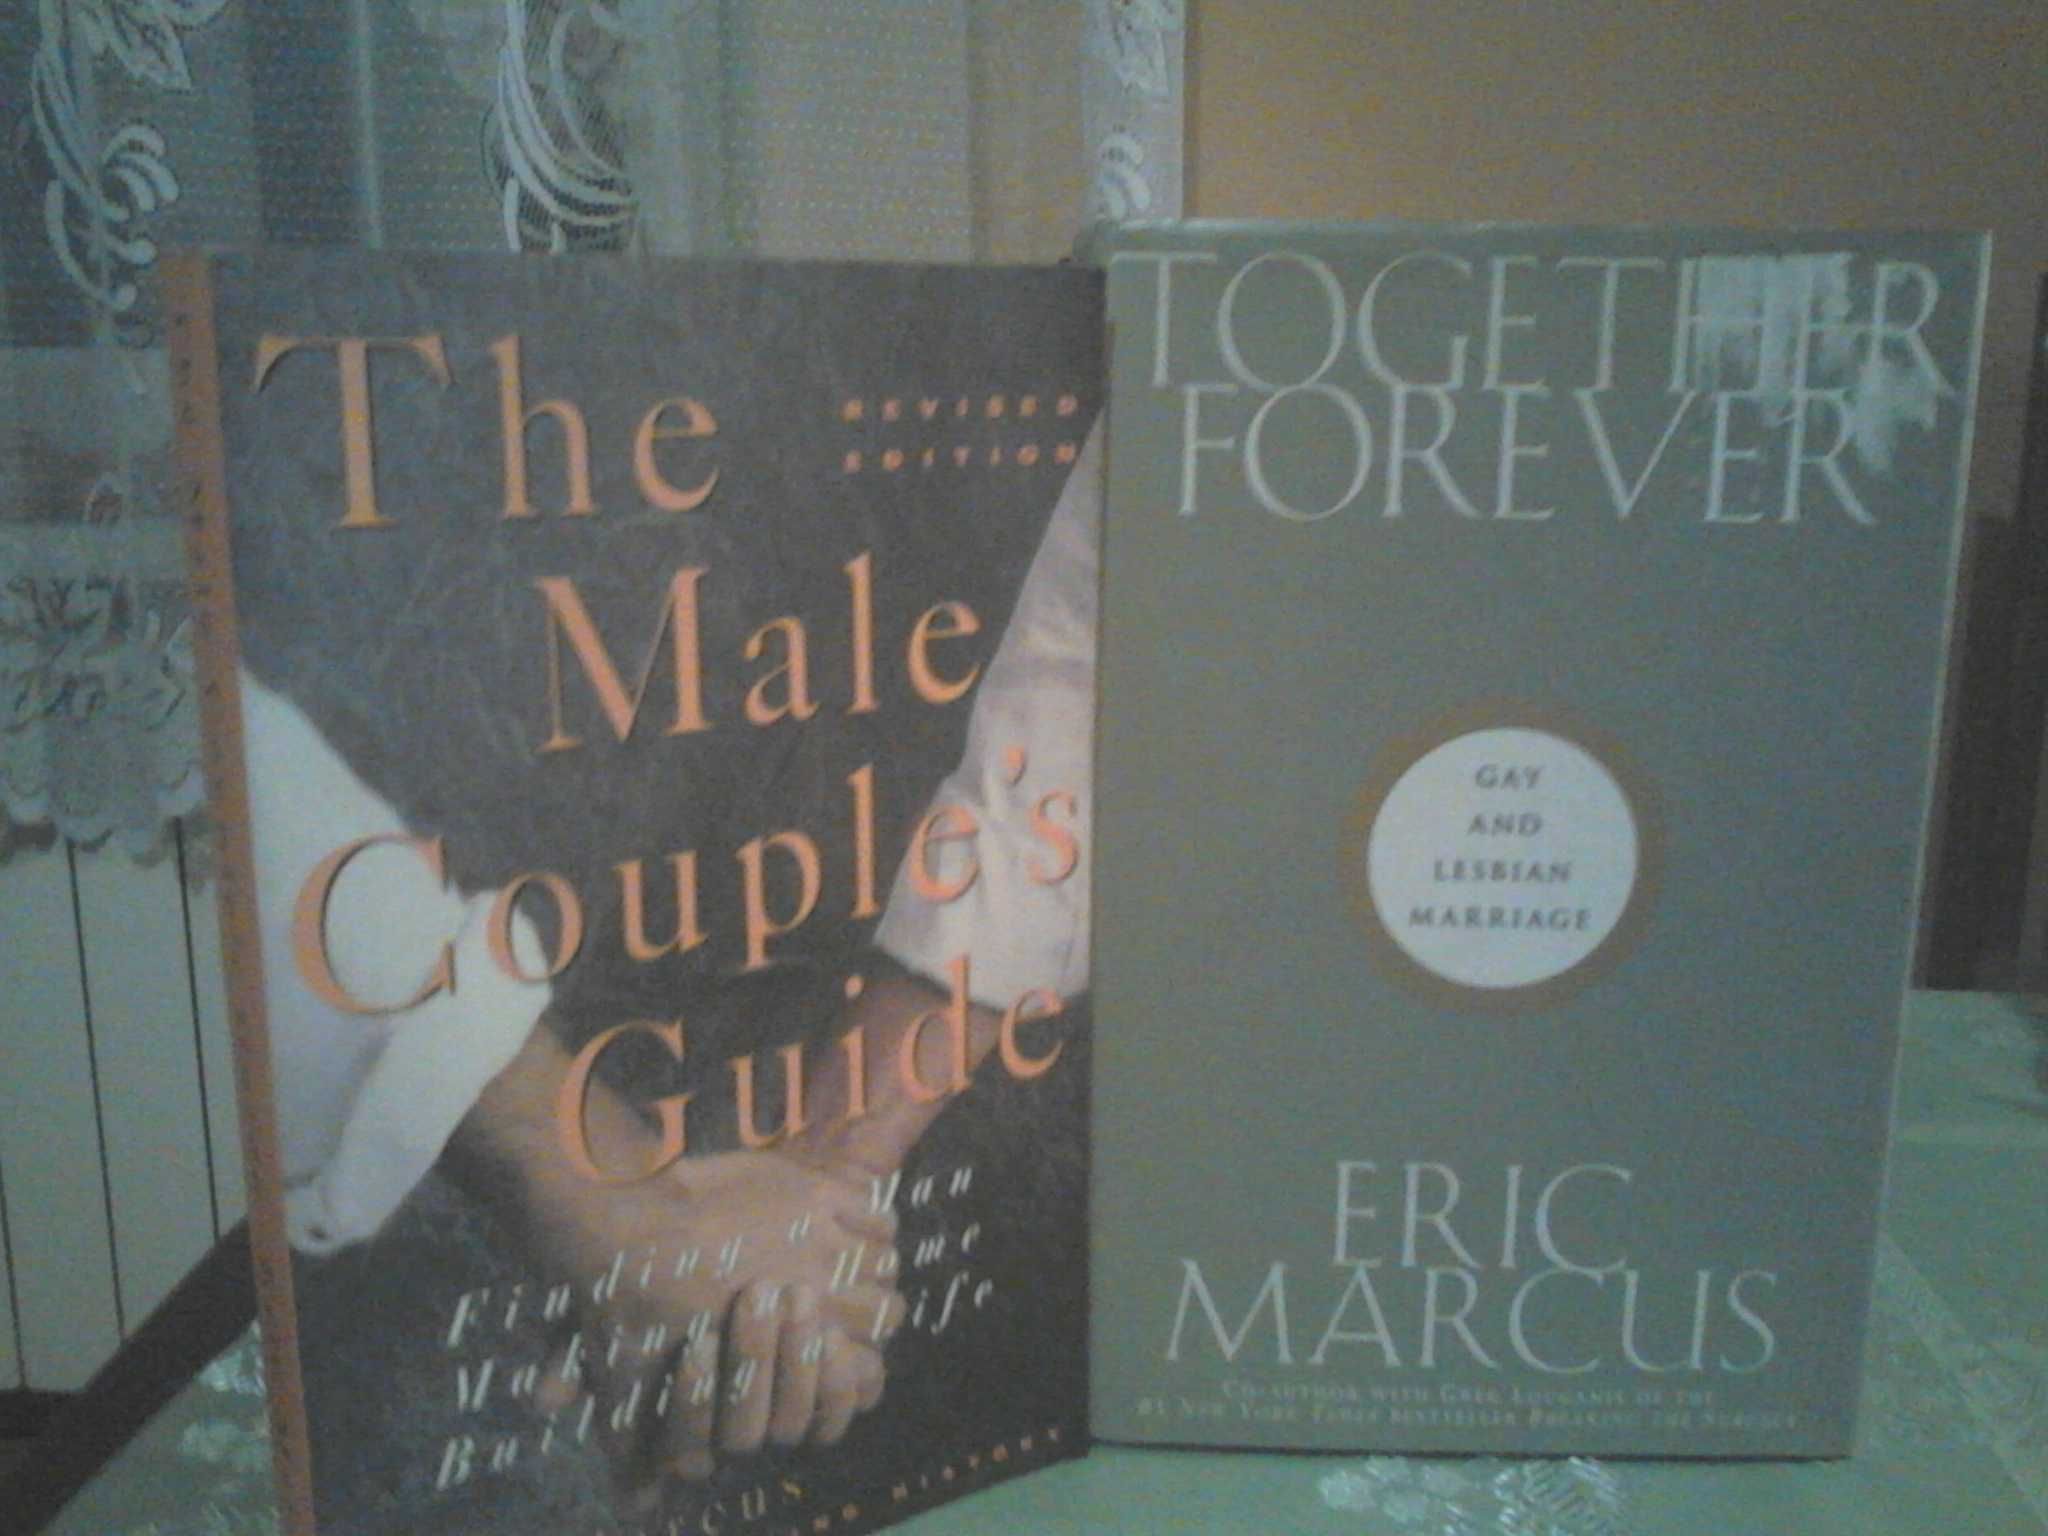 Together forever, The male couple's guide Eric Marcus